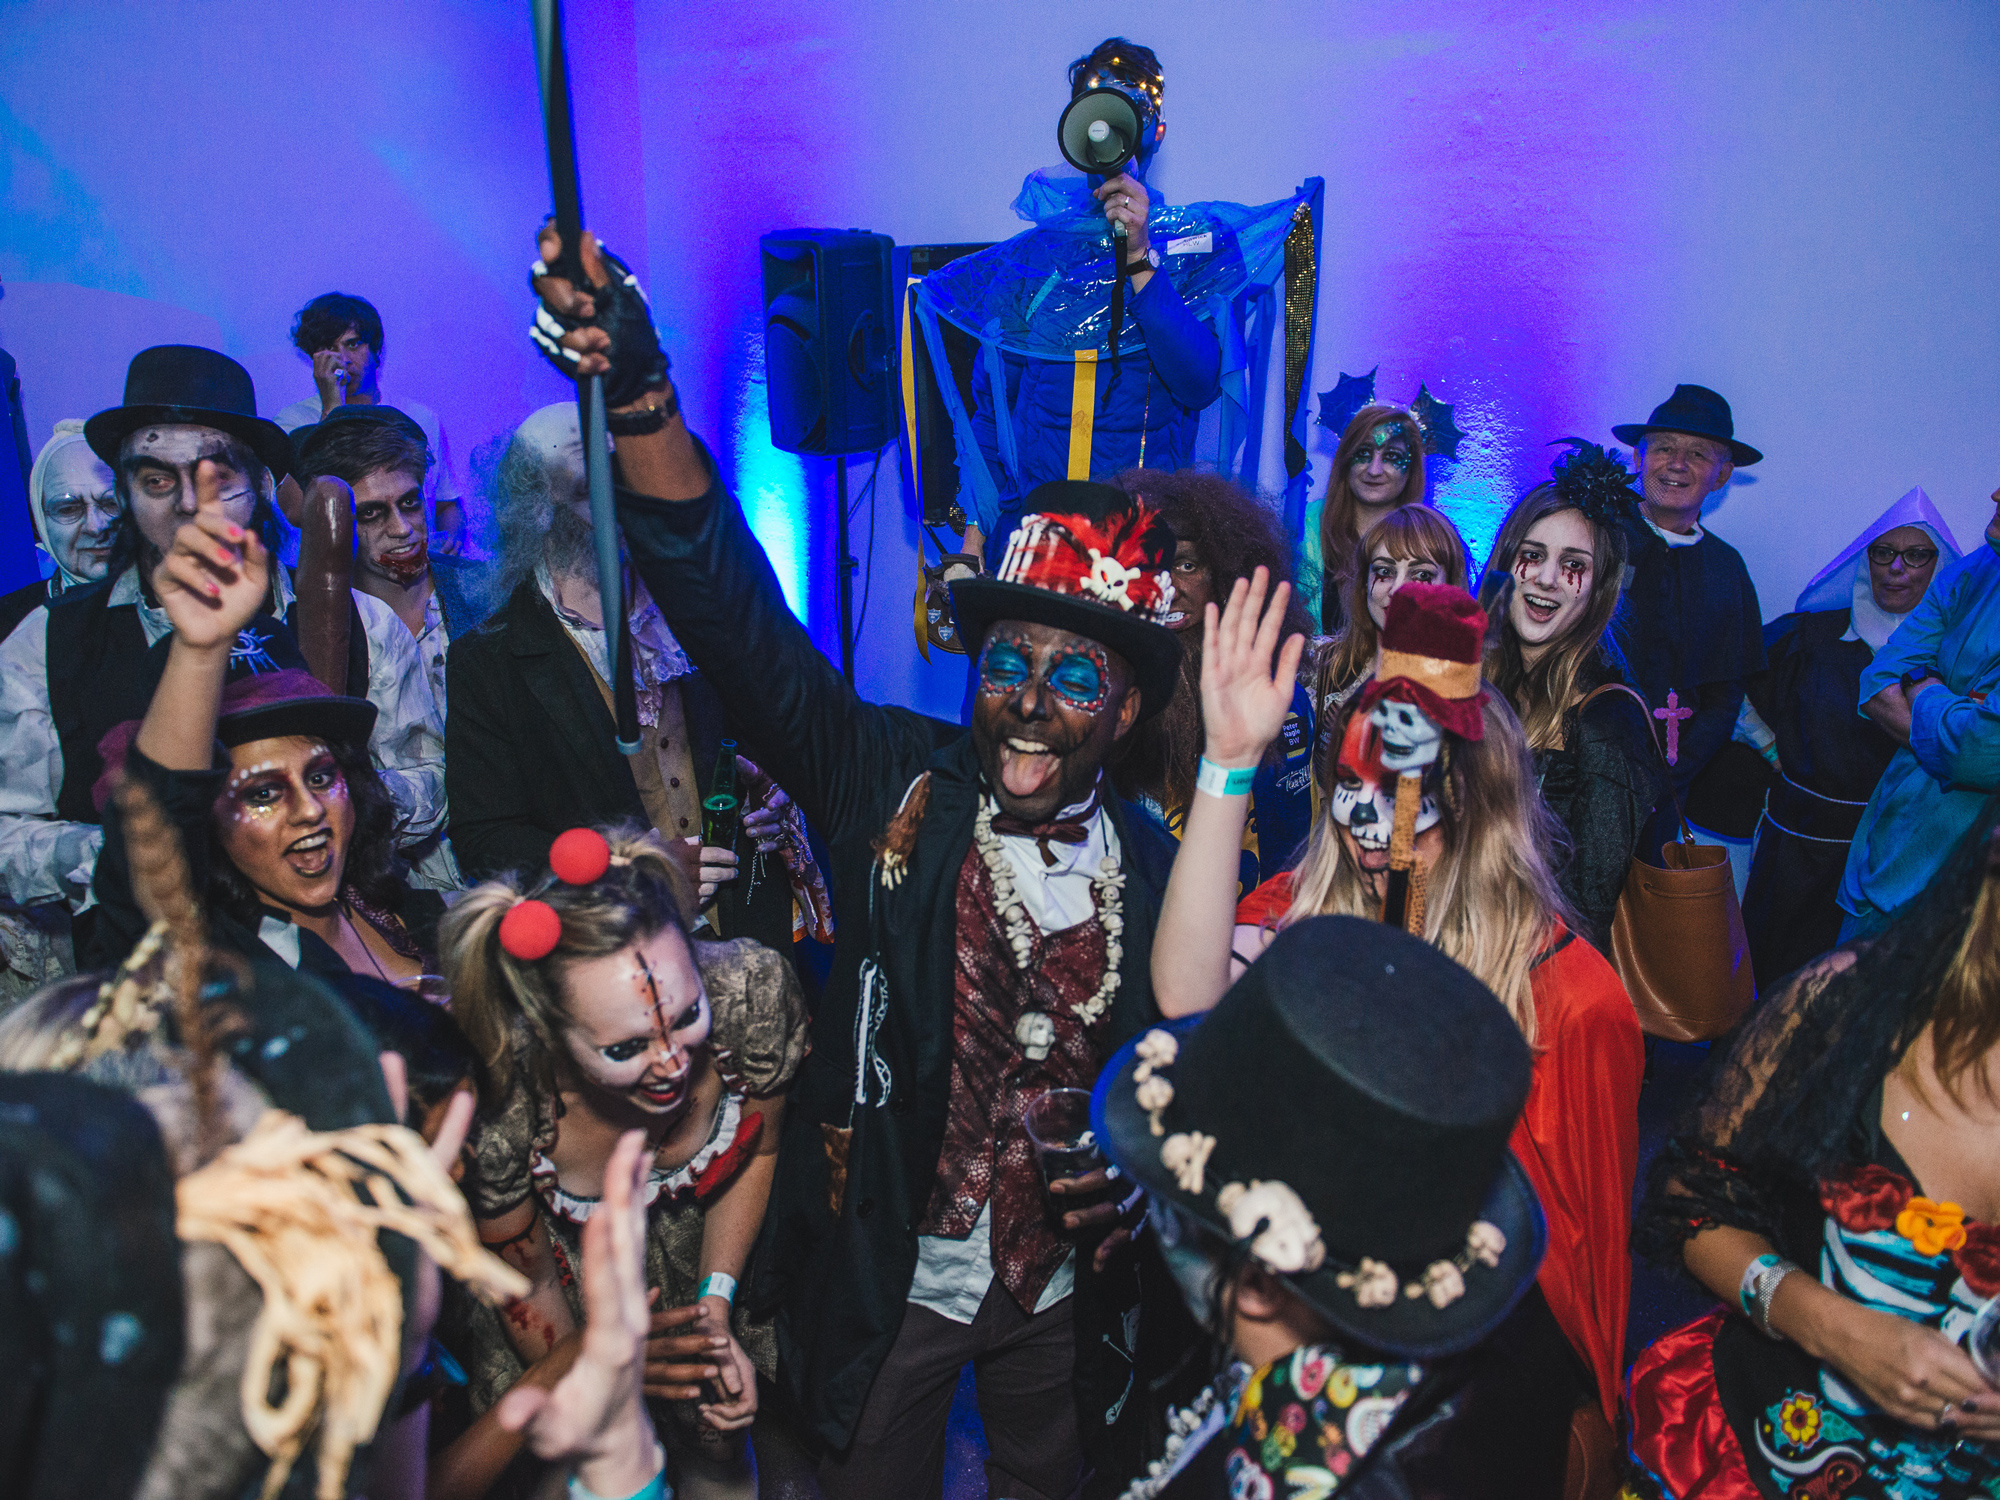 Eclectic mix of party-goers in various horror-themed costumes dancing under a purple light.